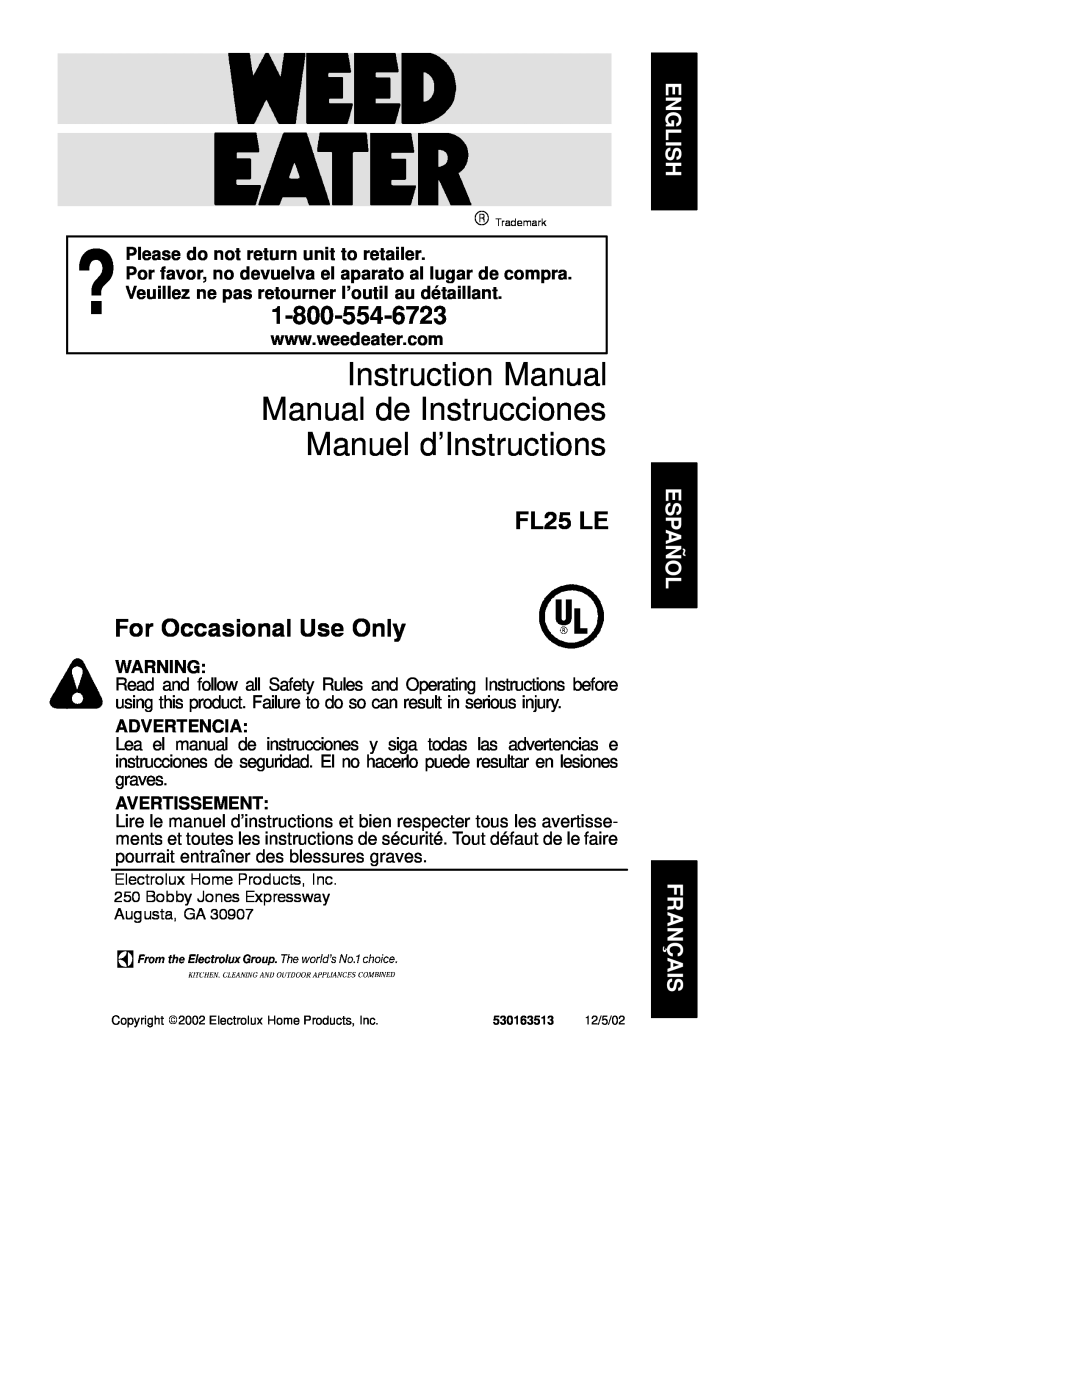 Weed Eater 530163513, FL25 LE instruction manual Please do not return unit to retailer, Advertencia, Avertissement 